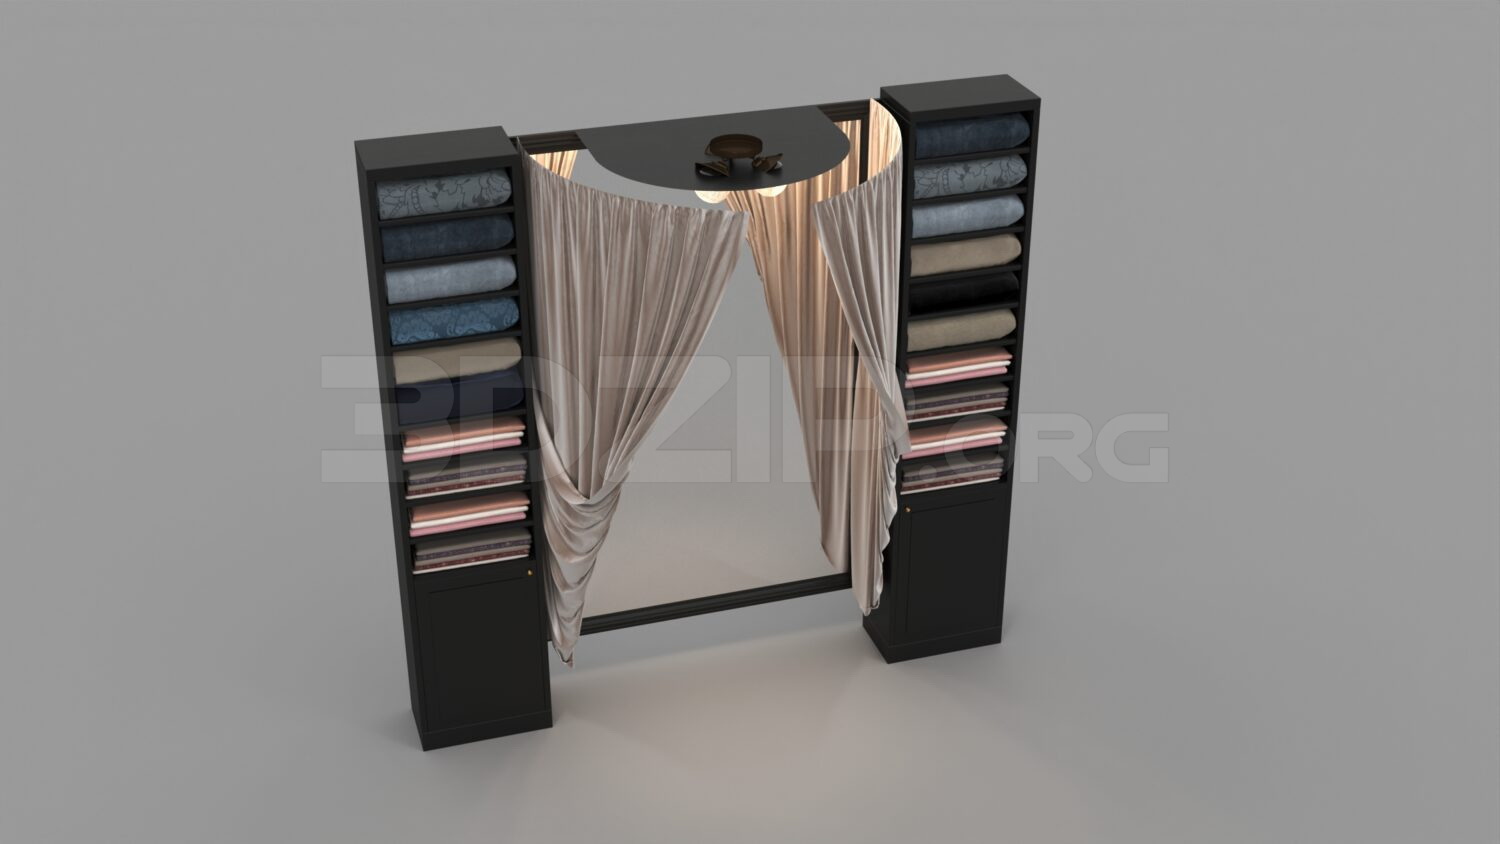 1299. Download Free Display Cabinets Model By D3 studio